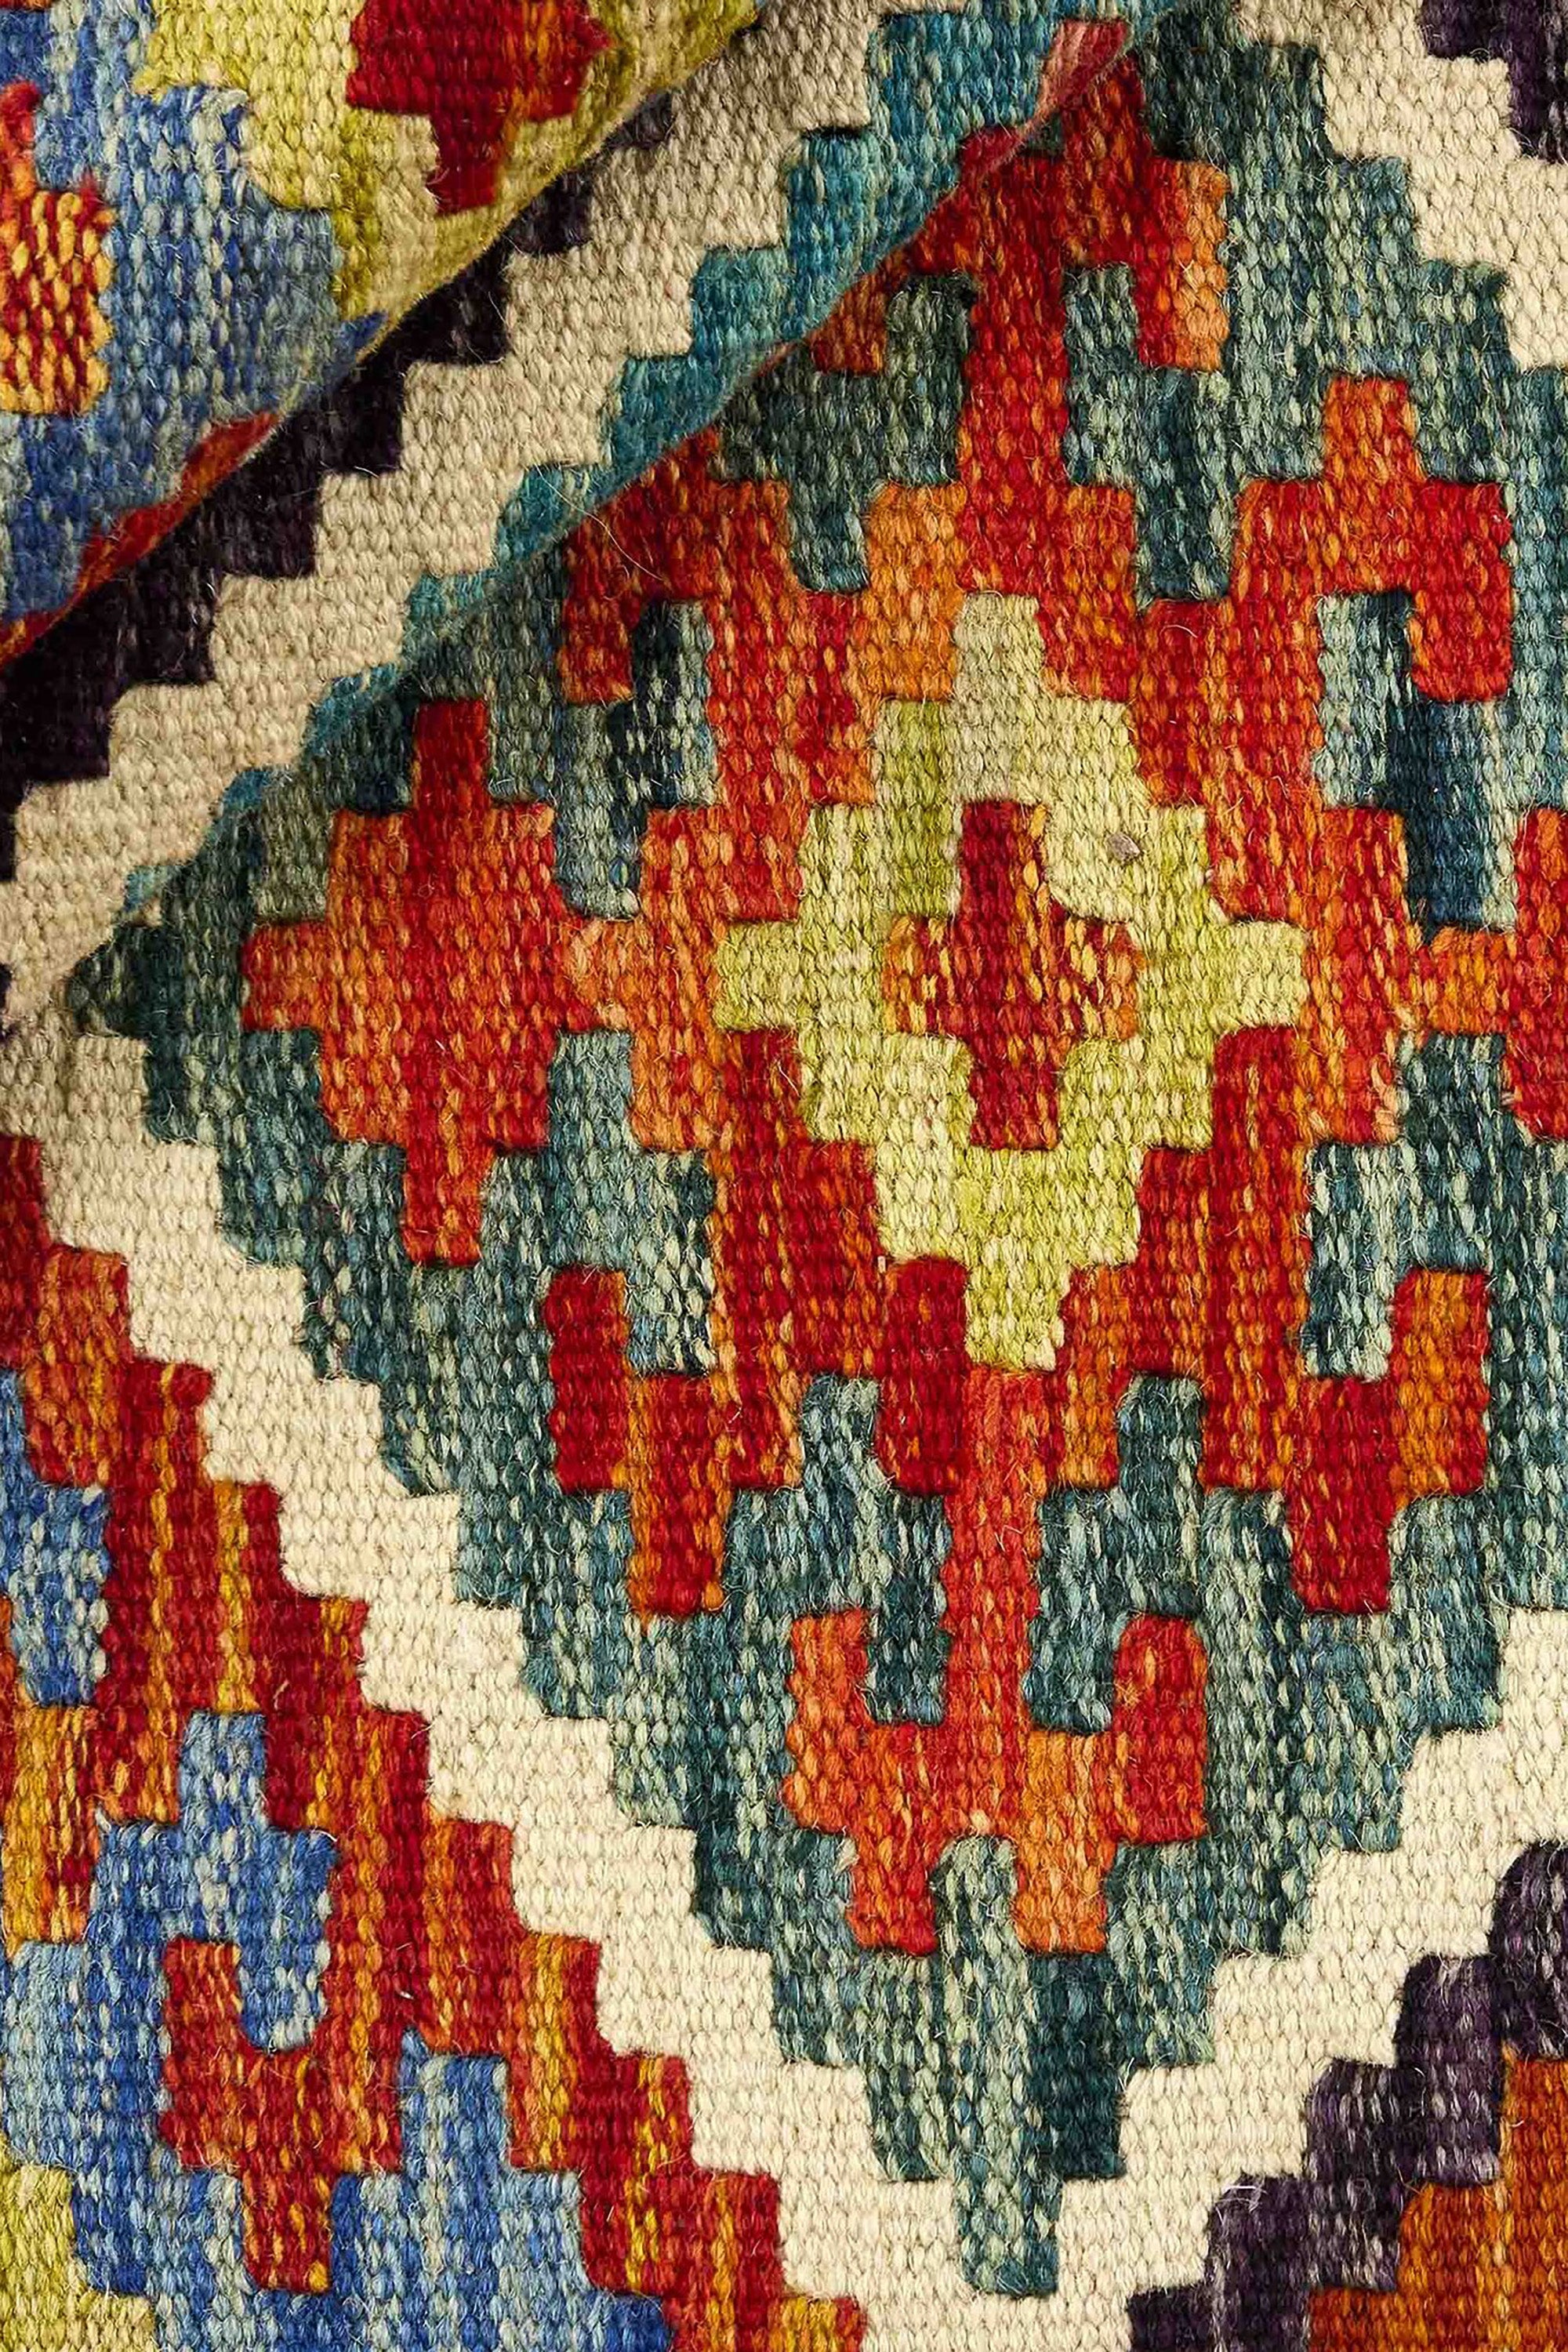 Authentic Afghan Kelim flatweave rug with traditional multicolour pattern.

